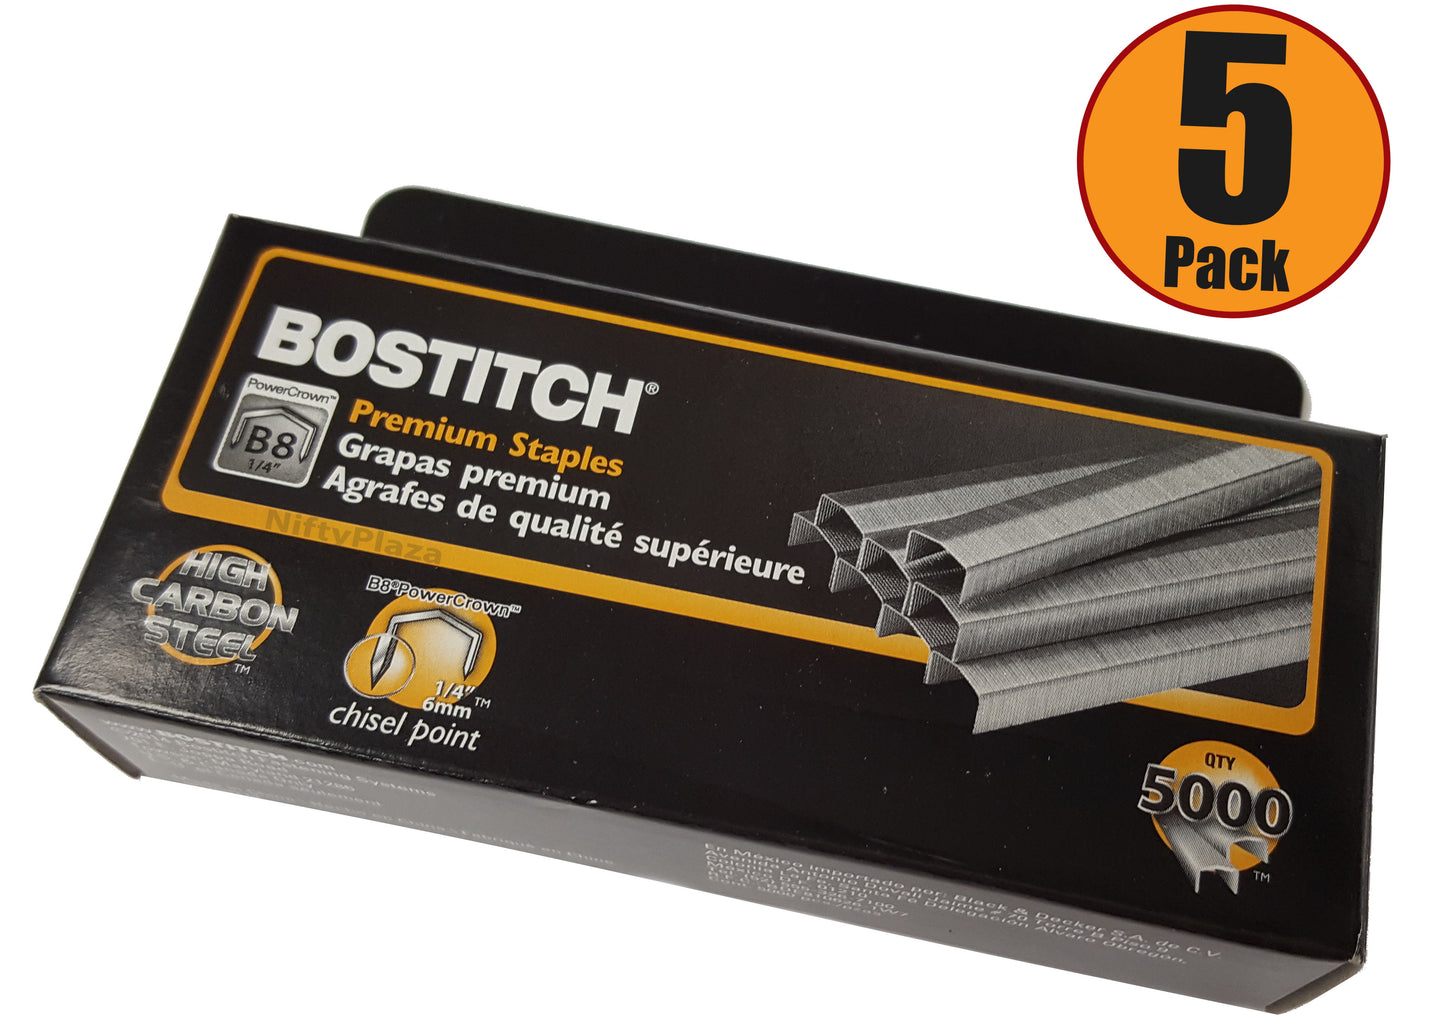 Stanley Bostitch B8 Staples 1/4", 5 Boxes (25000 Staples)